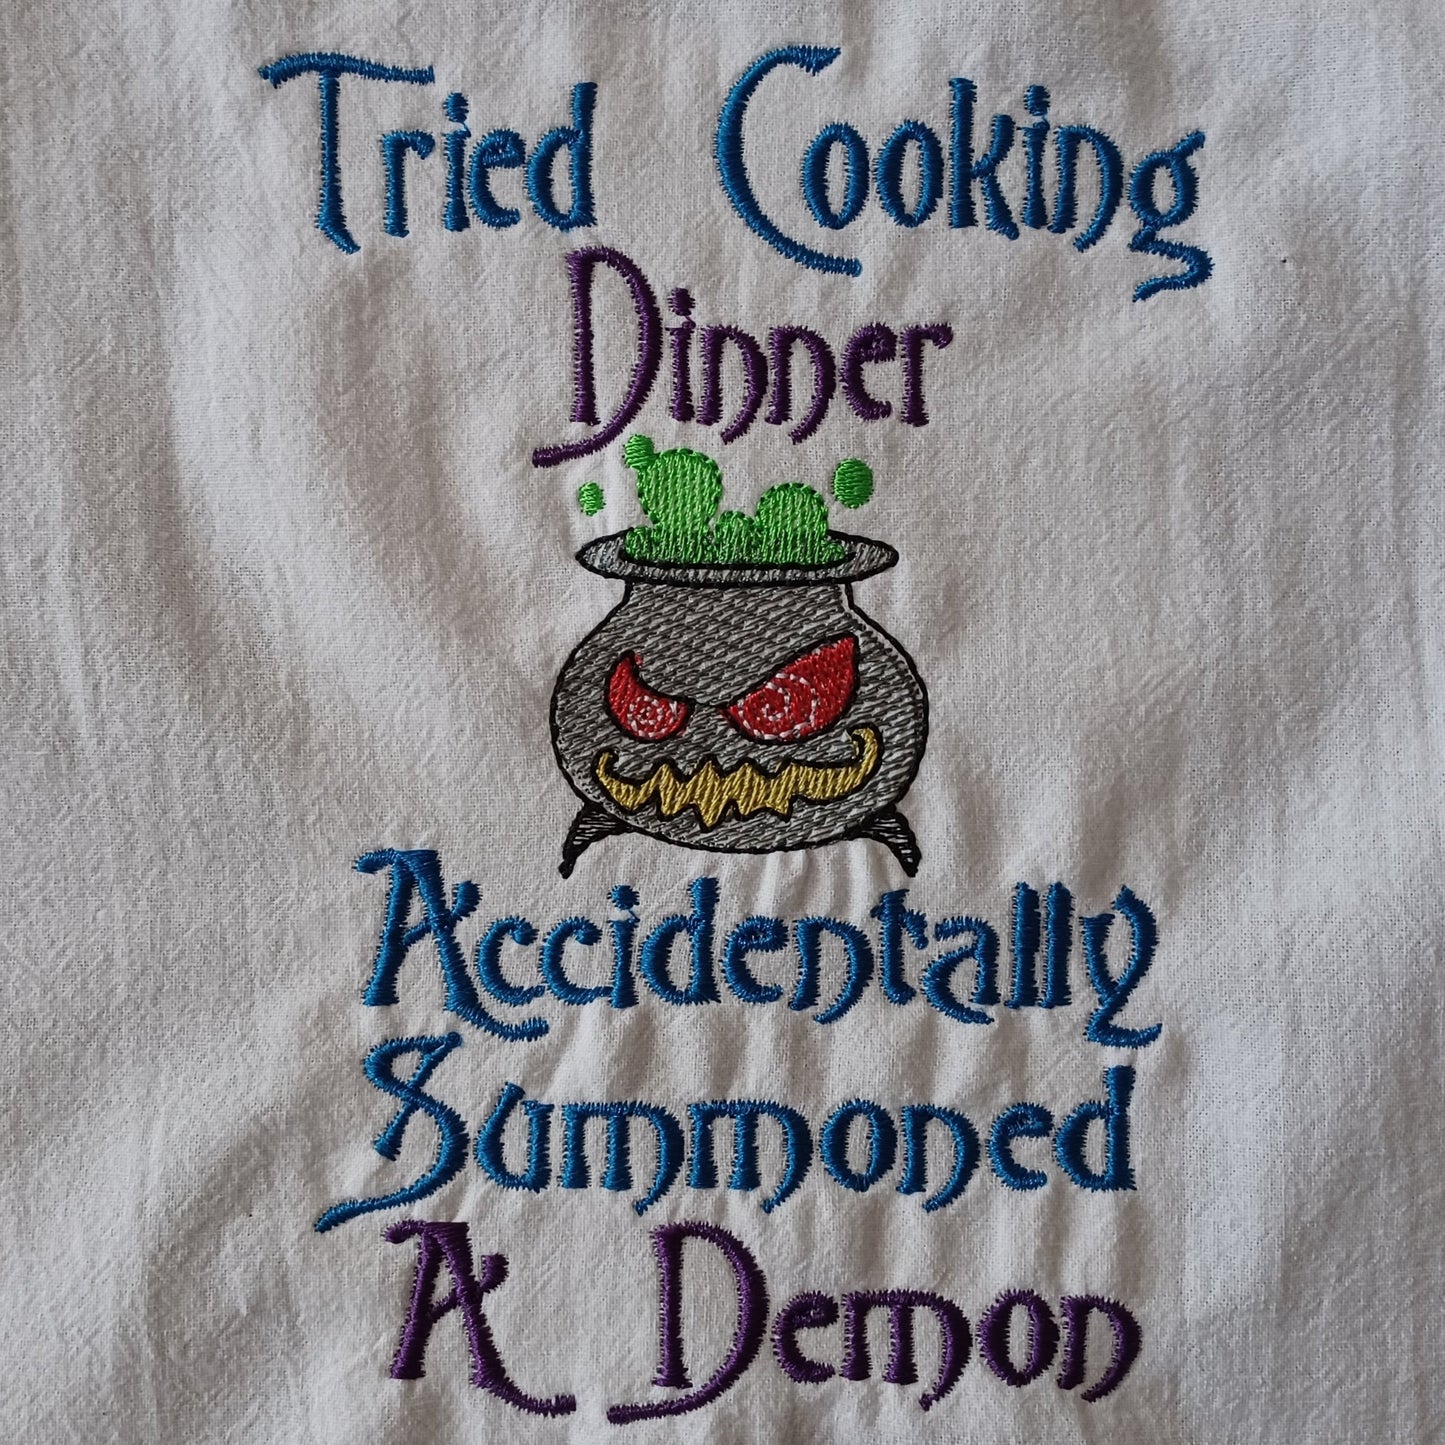 Tried Cooking Dinner, Accidentally Summoned a Demon (Embroidered CYO)